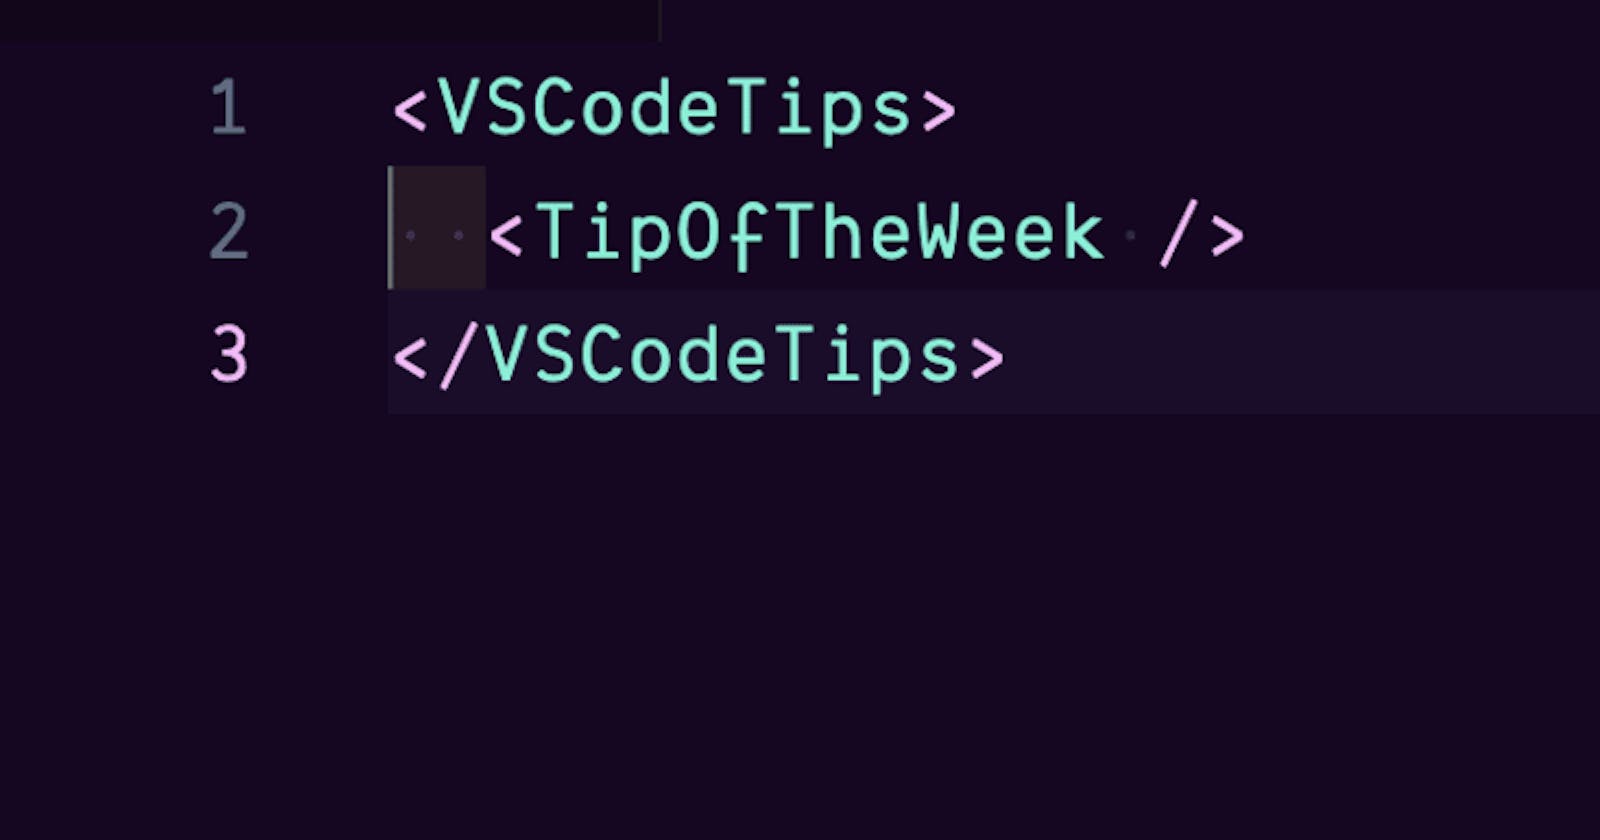 VS Code Tip of the week: Live Share